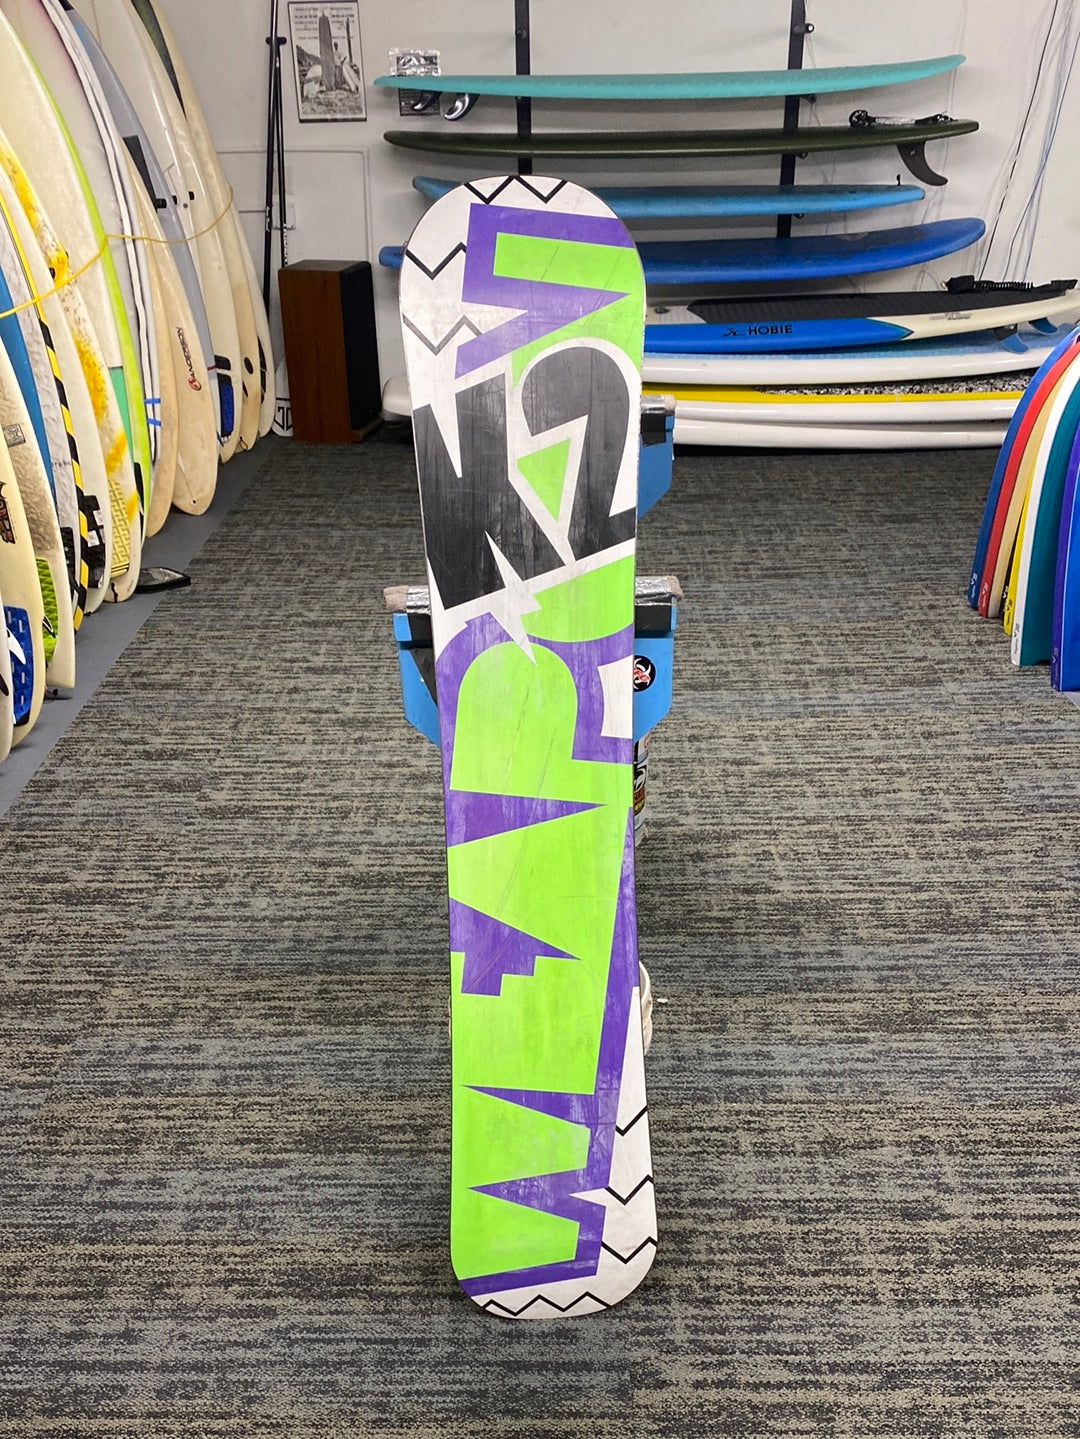 Used Snowboard K2 Weapon